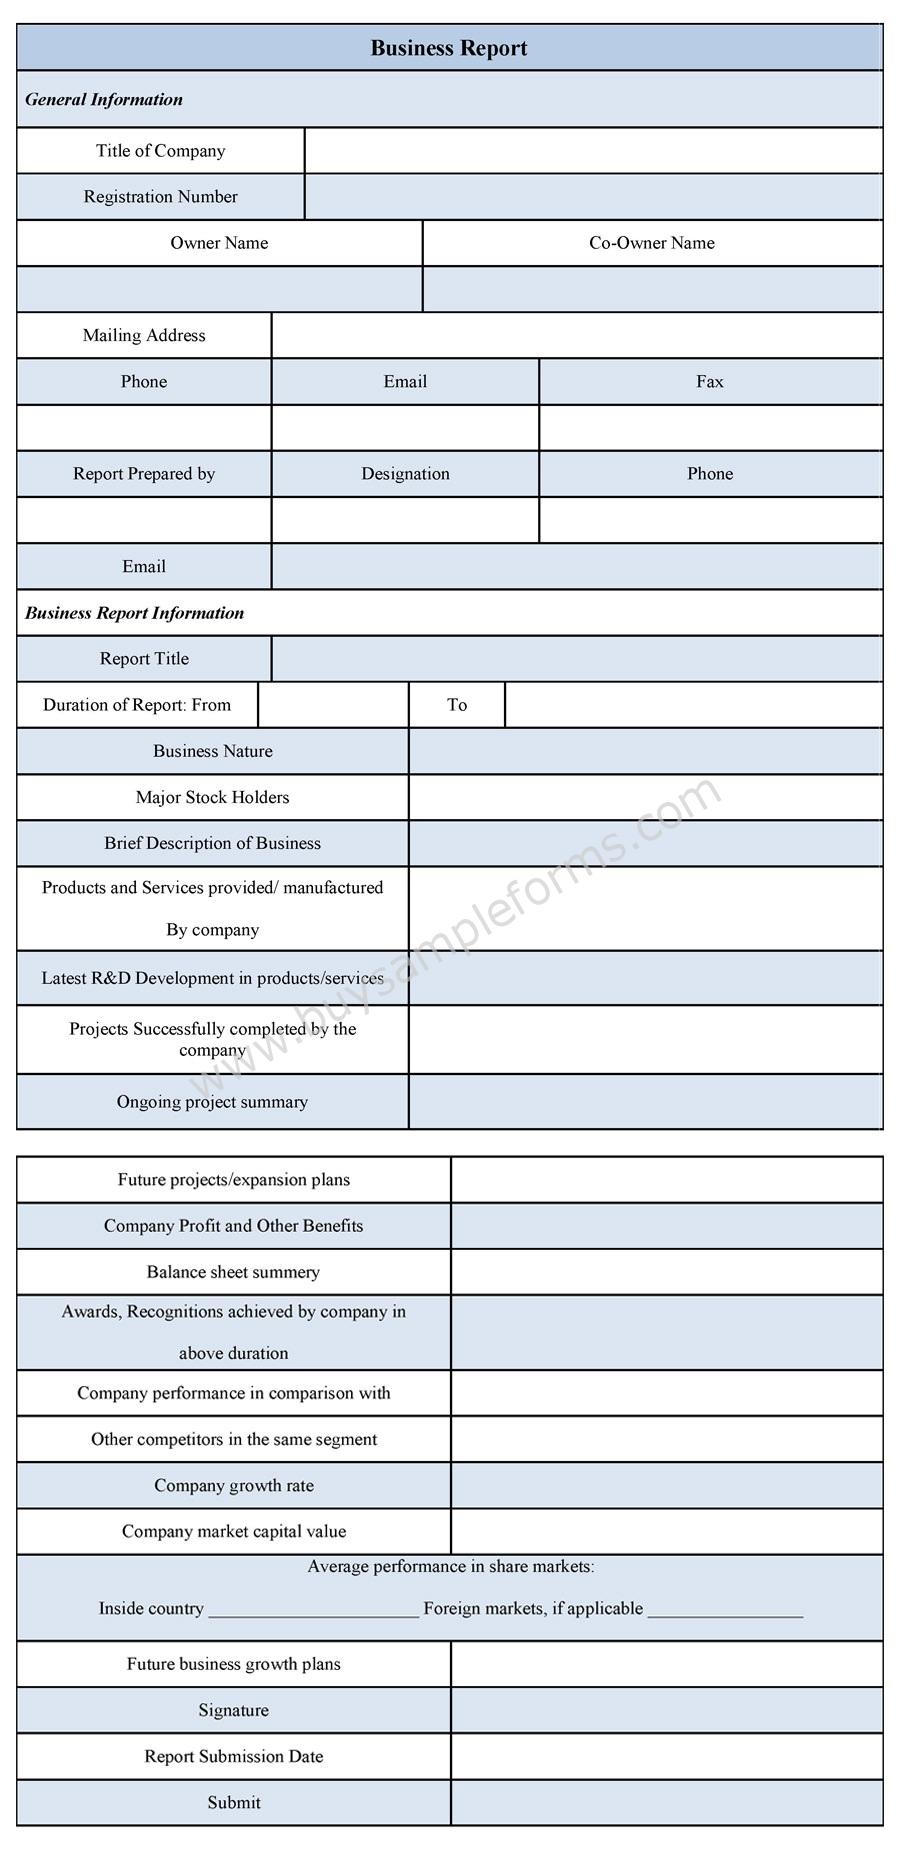 Business Report Form